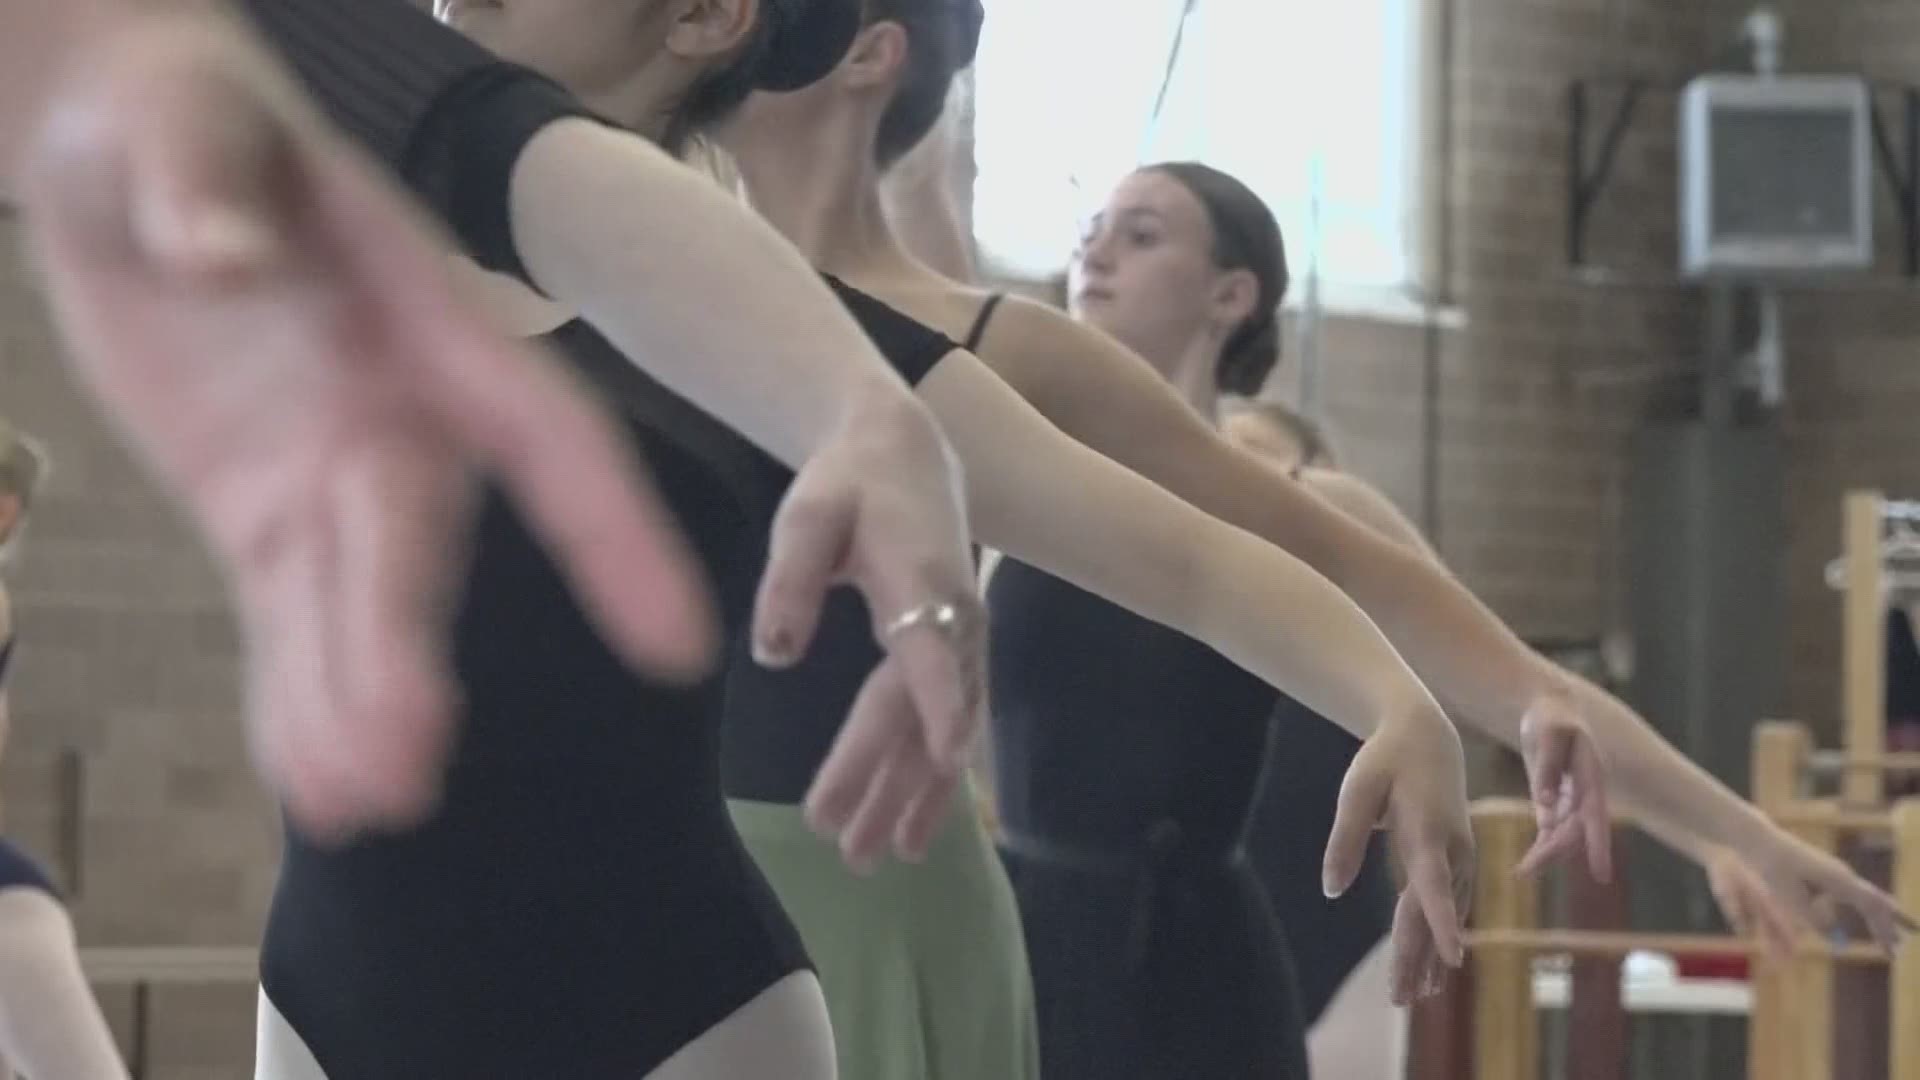 Members of the Bossov Ballet from the Maine Central Institute in Pittsfield are set to perform next Friday for a live audience in Orono.